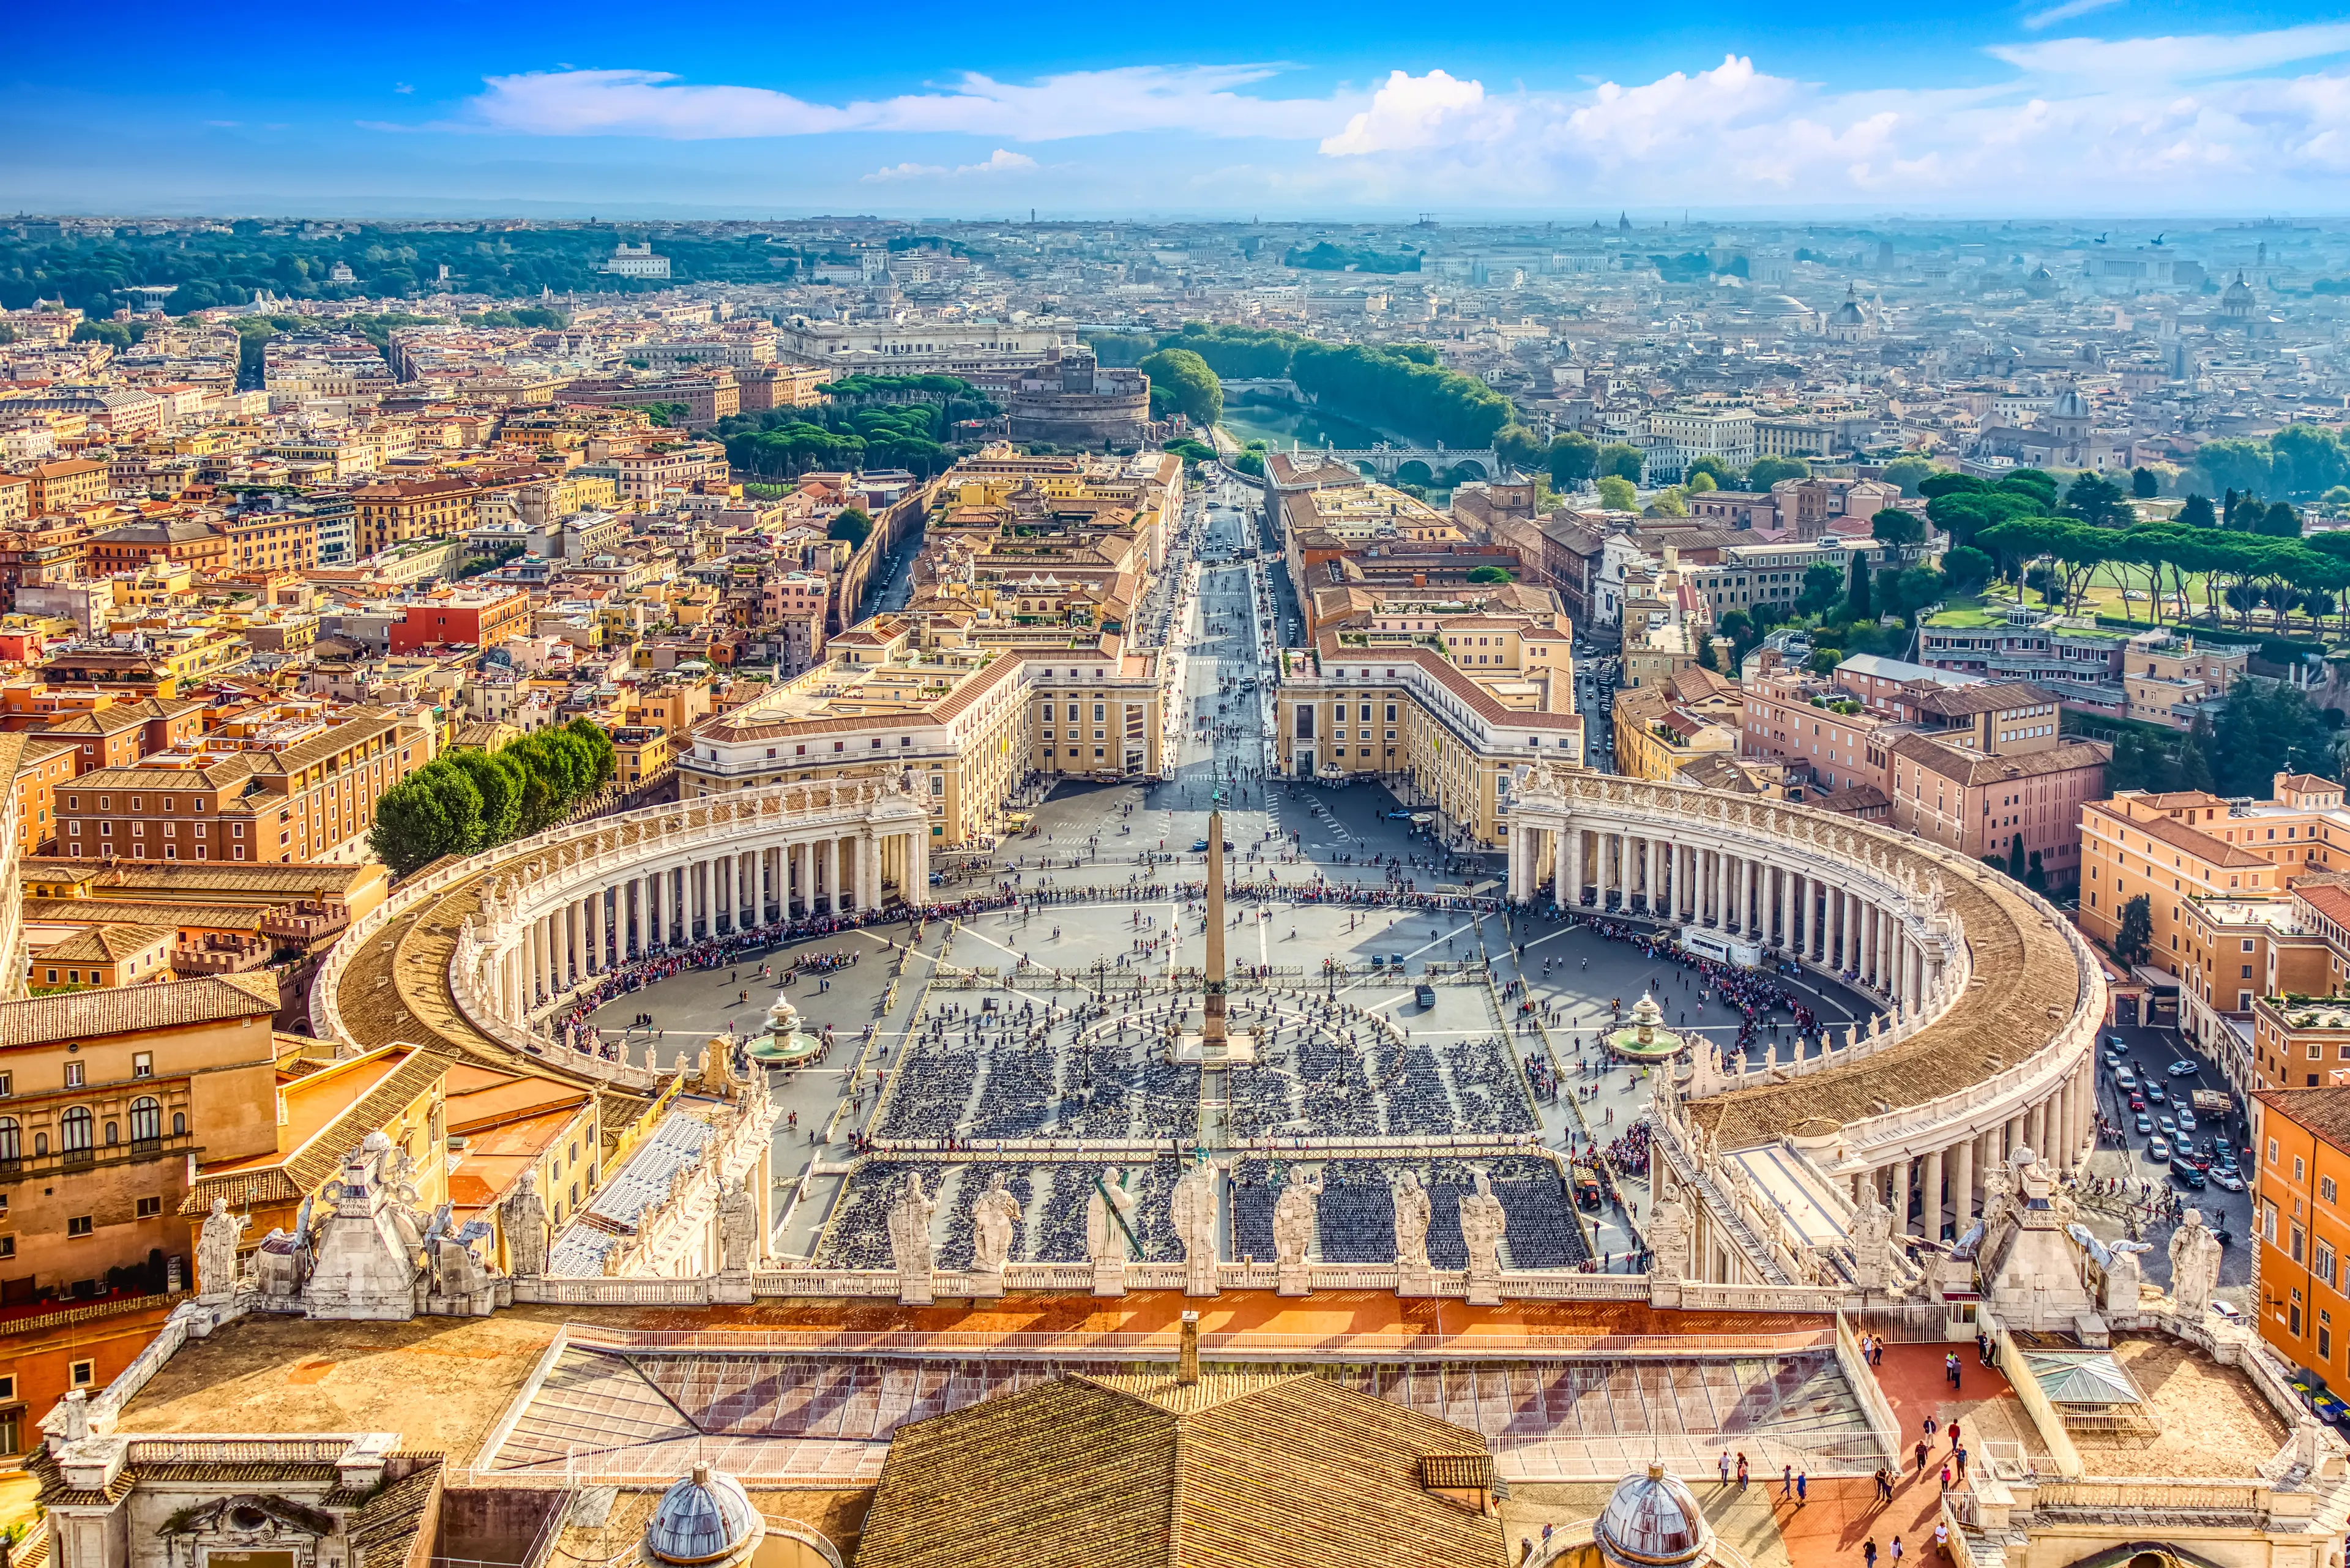 4-Day Rome Adventure: Nightlife, Sightseeing & Fun with Friends